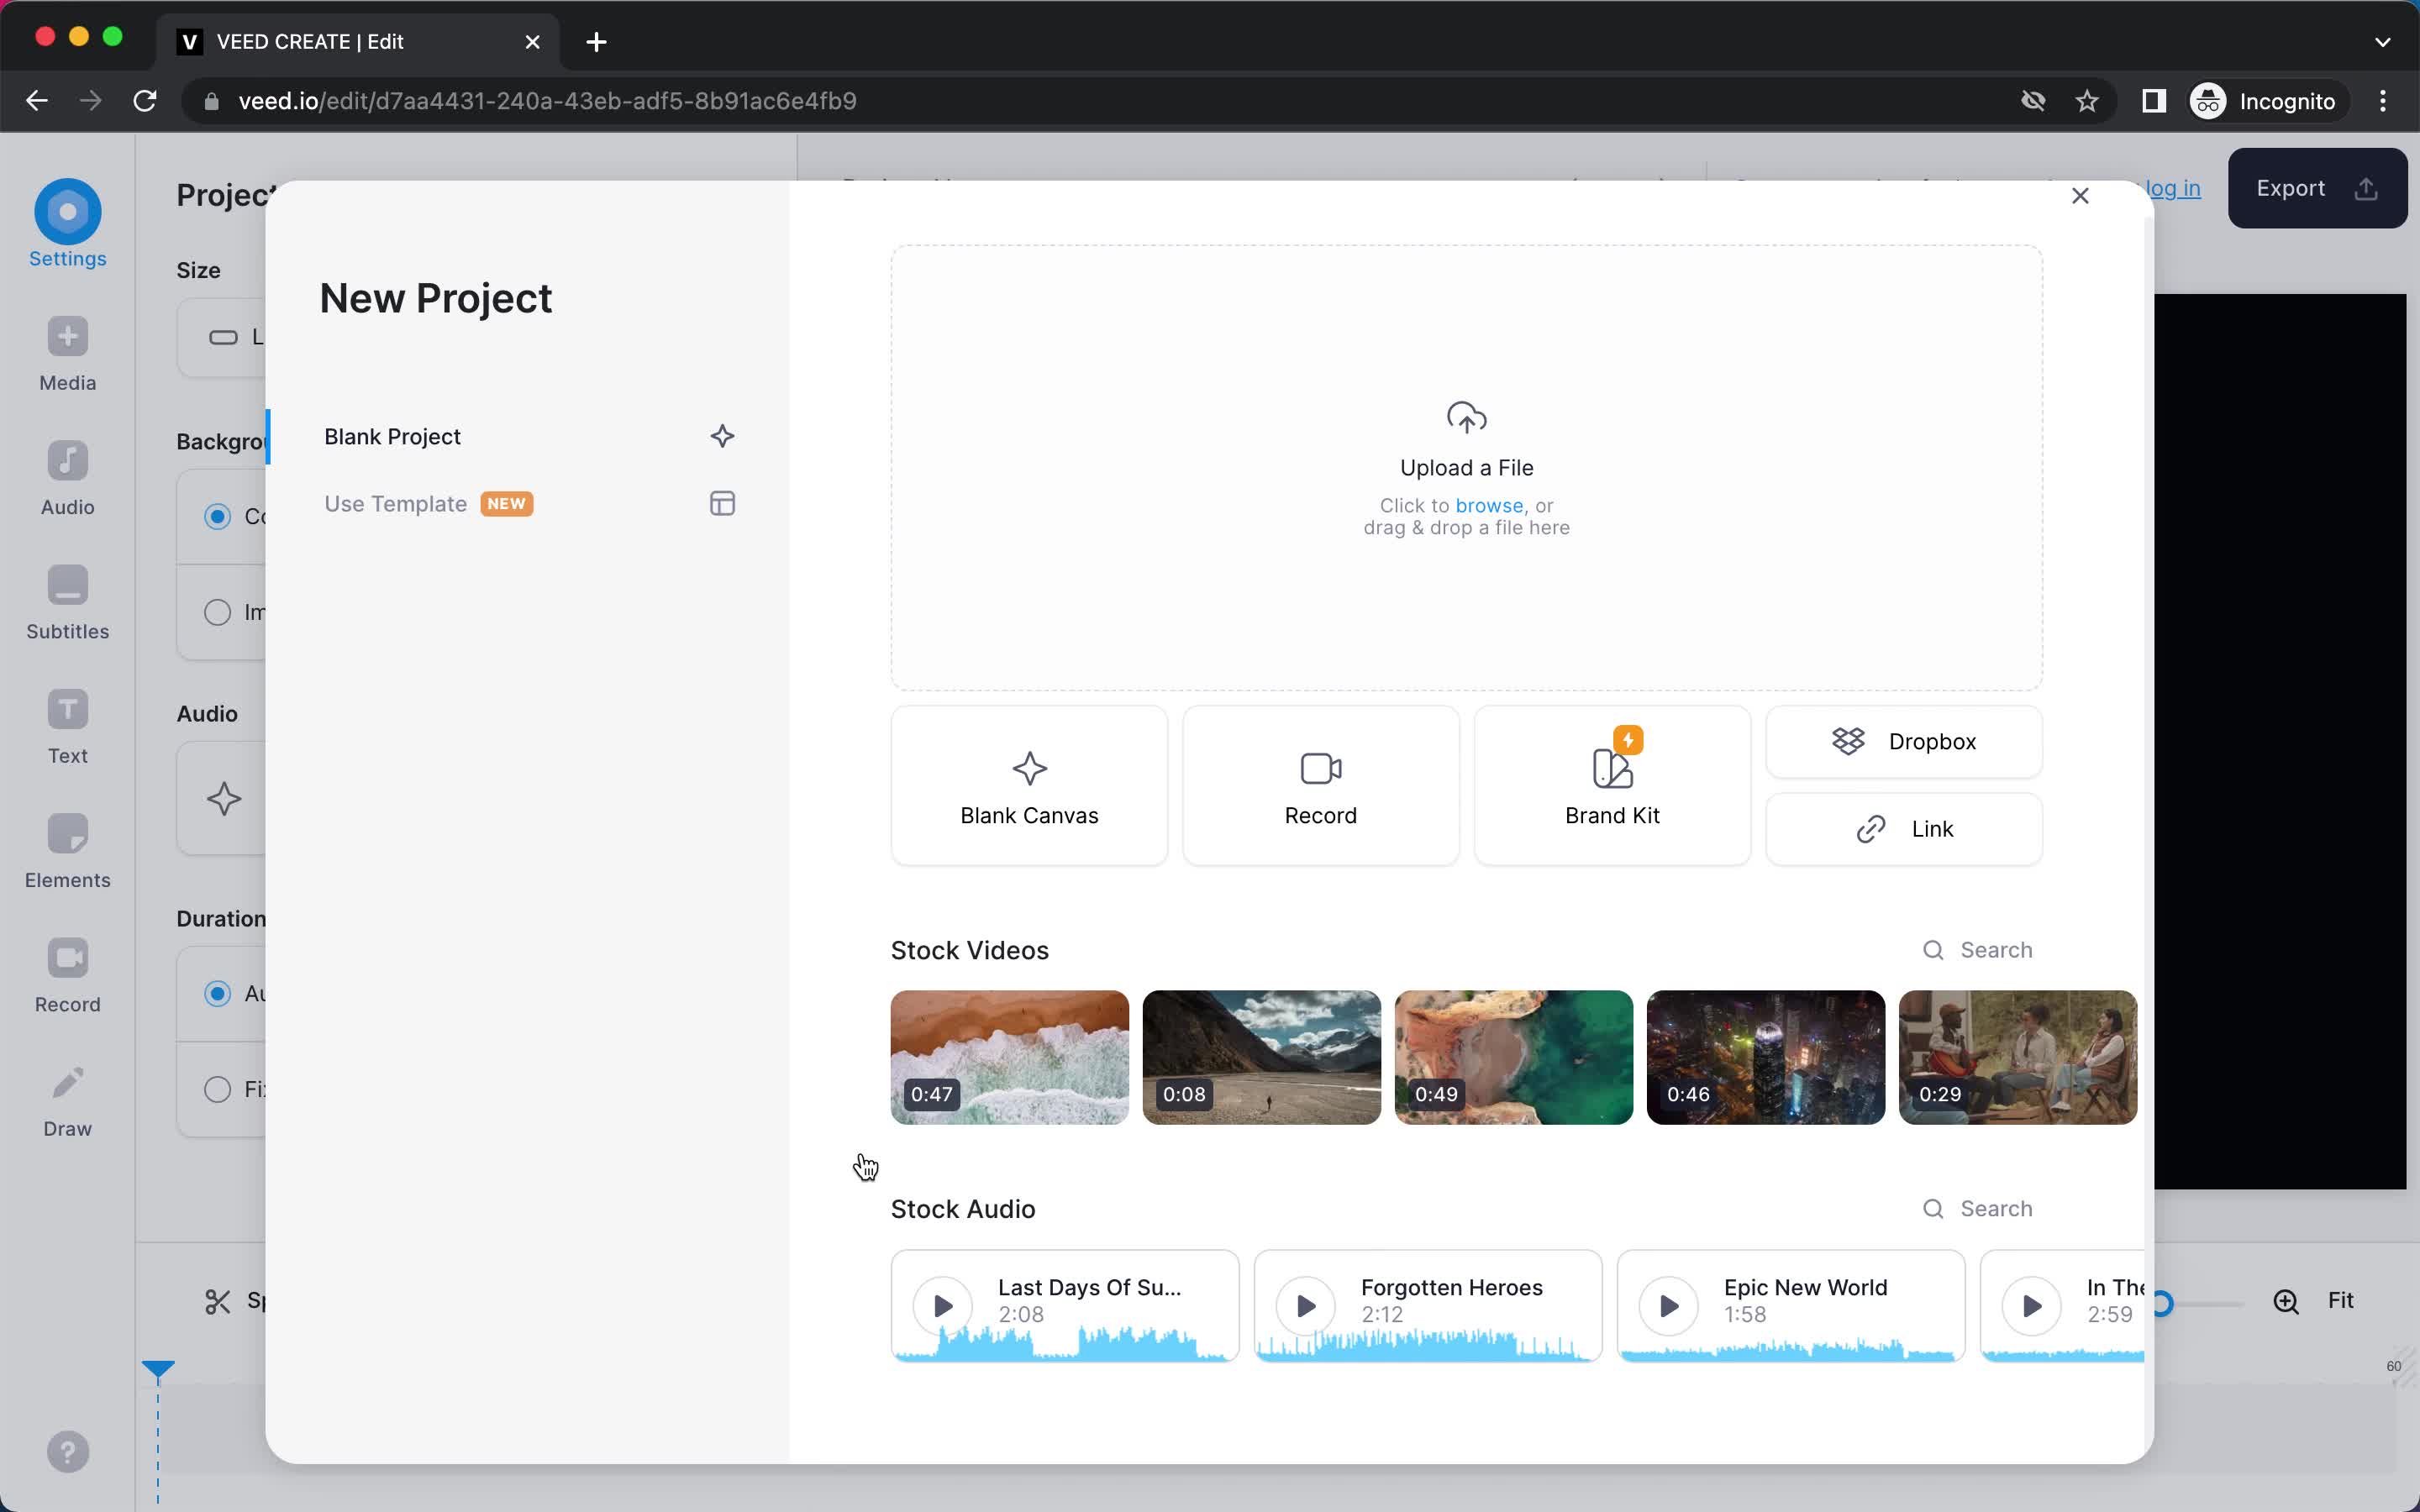 Screenshot of Create project on Onboarding on VEED.IO user flow